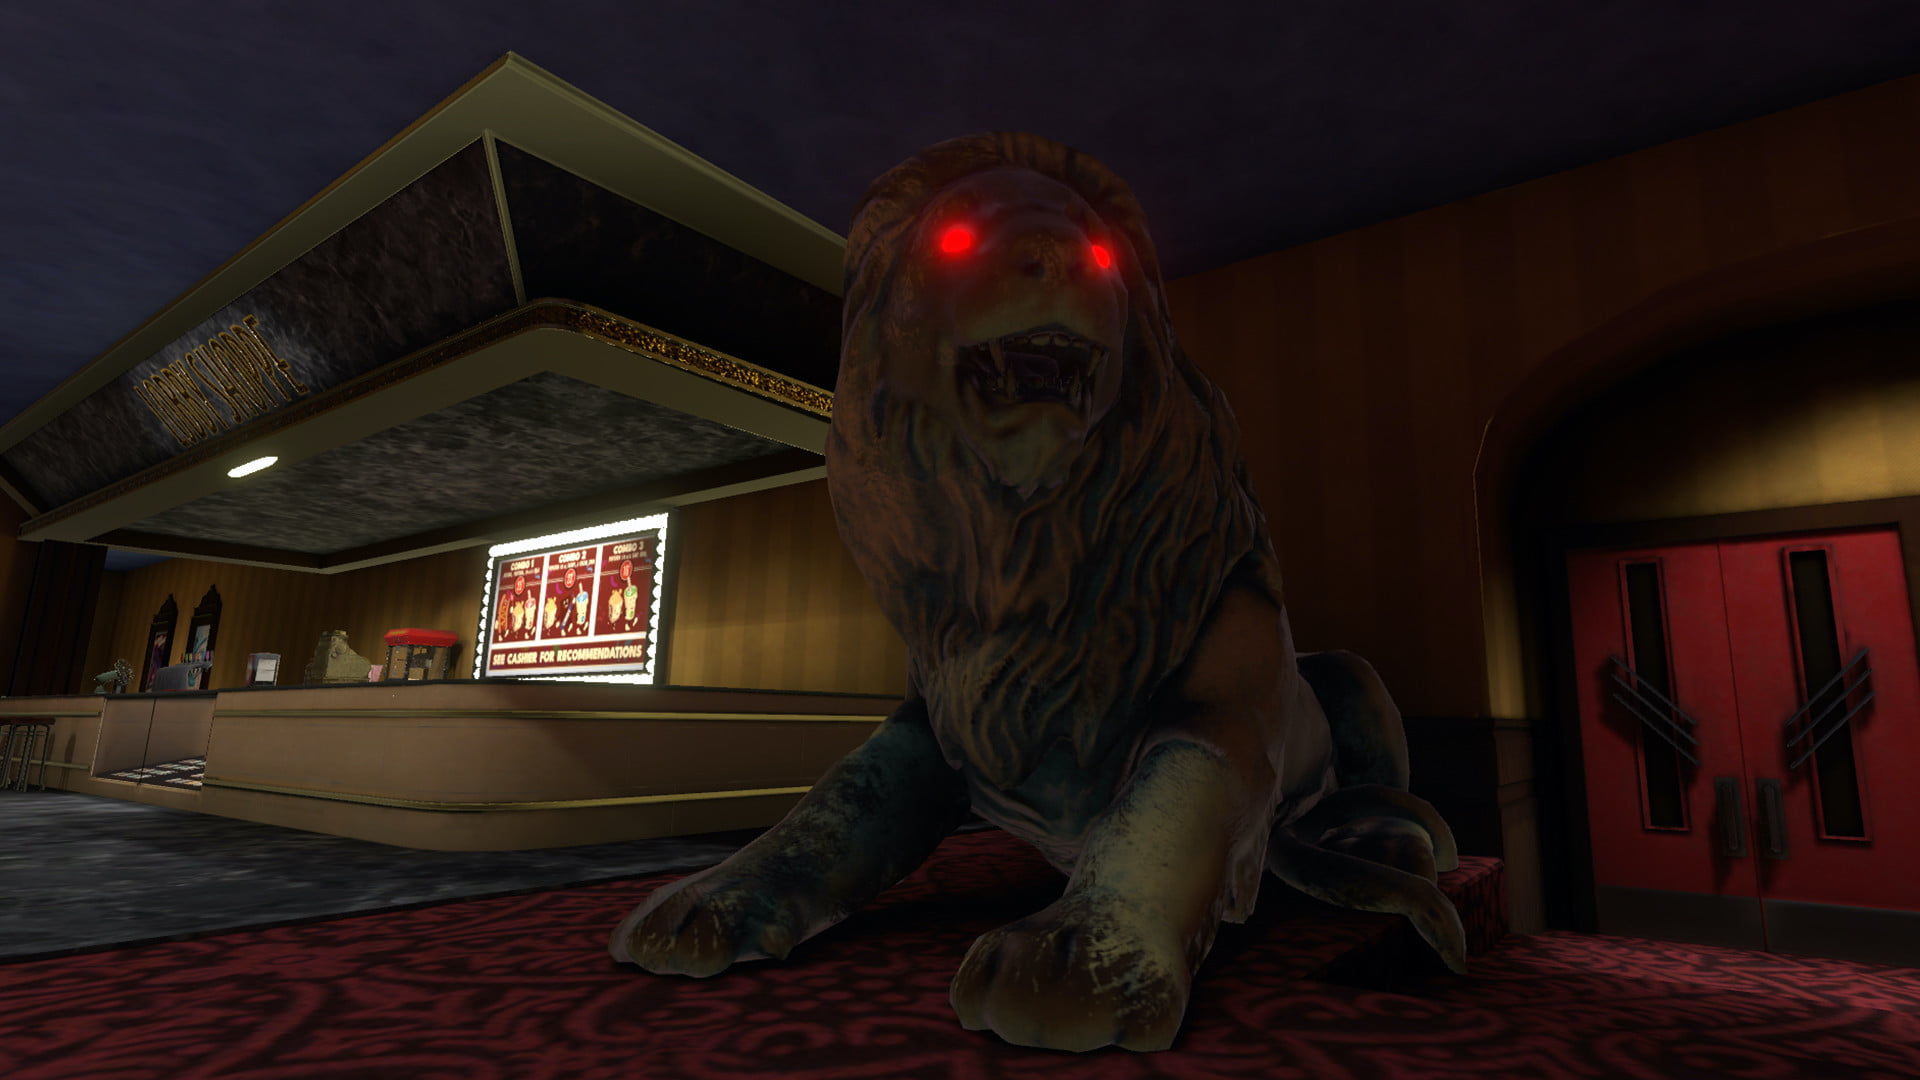 The lobby of the cinema with a large lion statue.